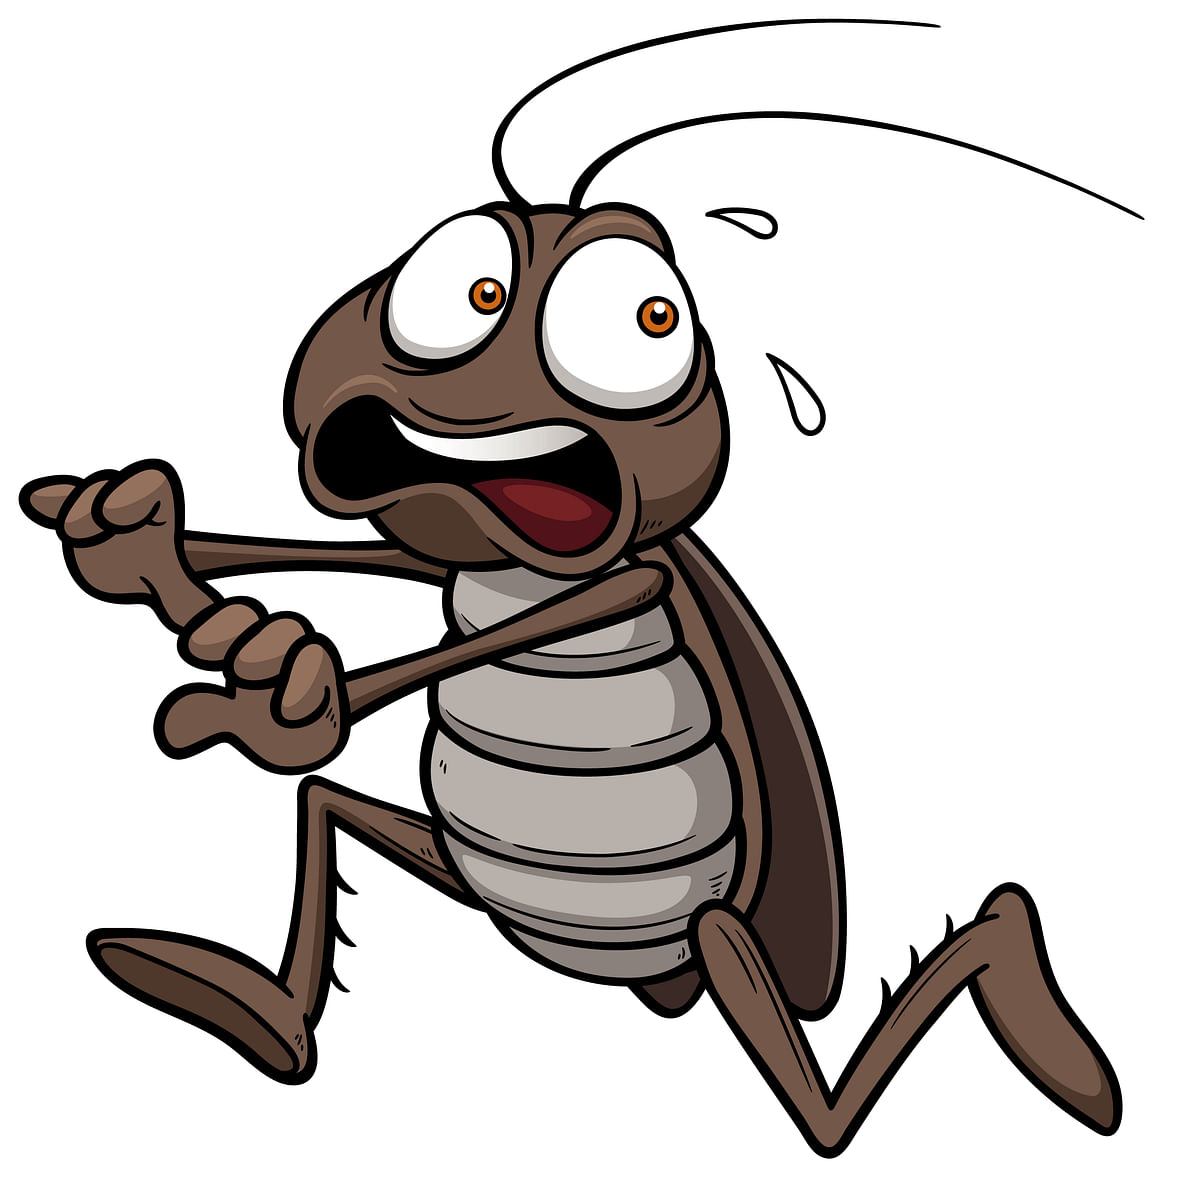 When Raghu was greeted by a cockroach instead of his morning filter coffee, things were bound to go haywire.